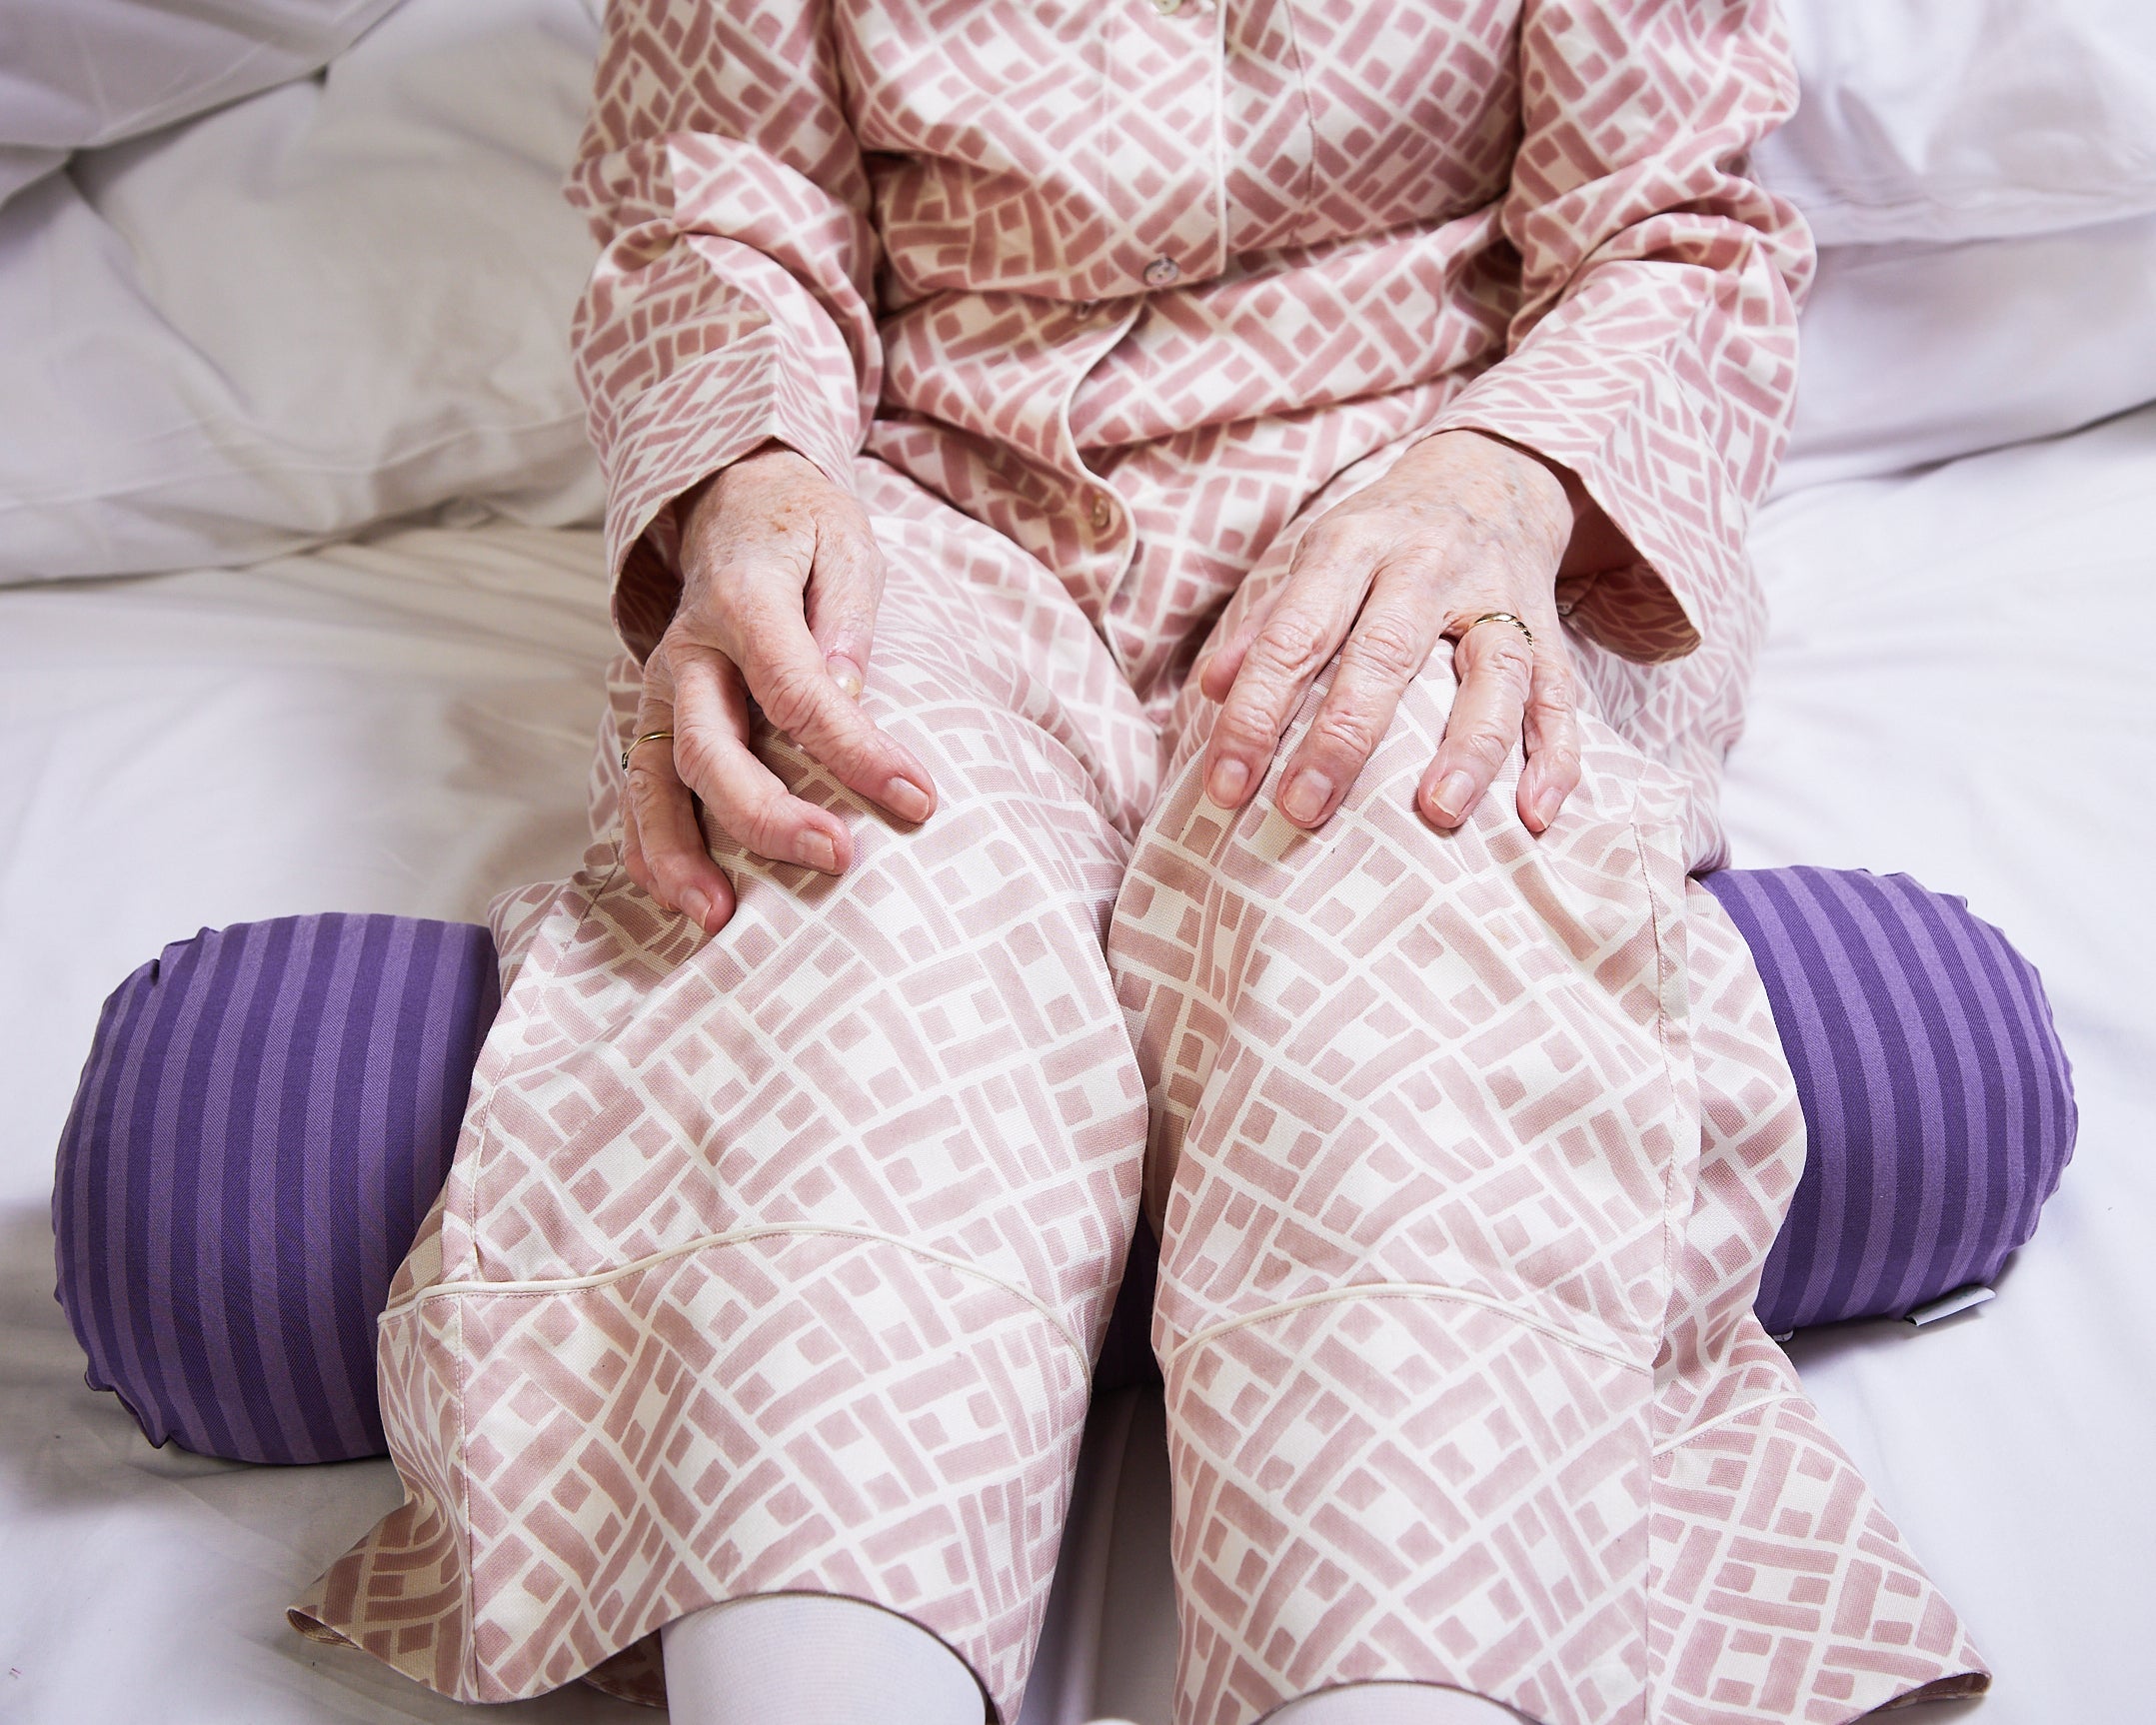 Knee support pillow used by senior women